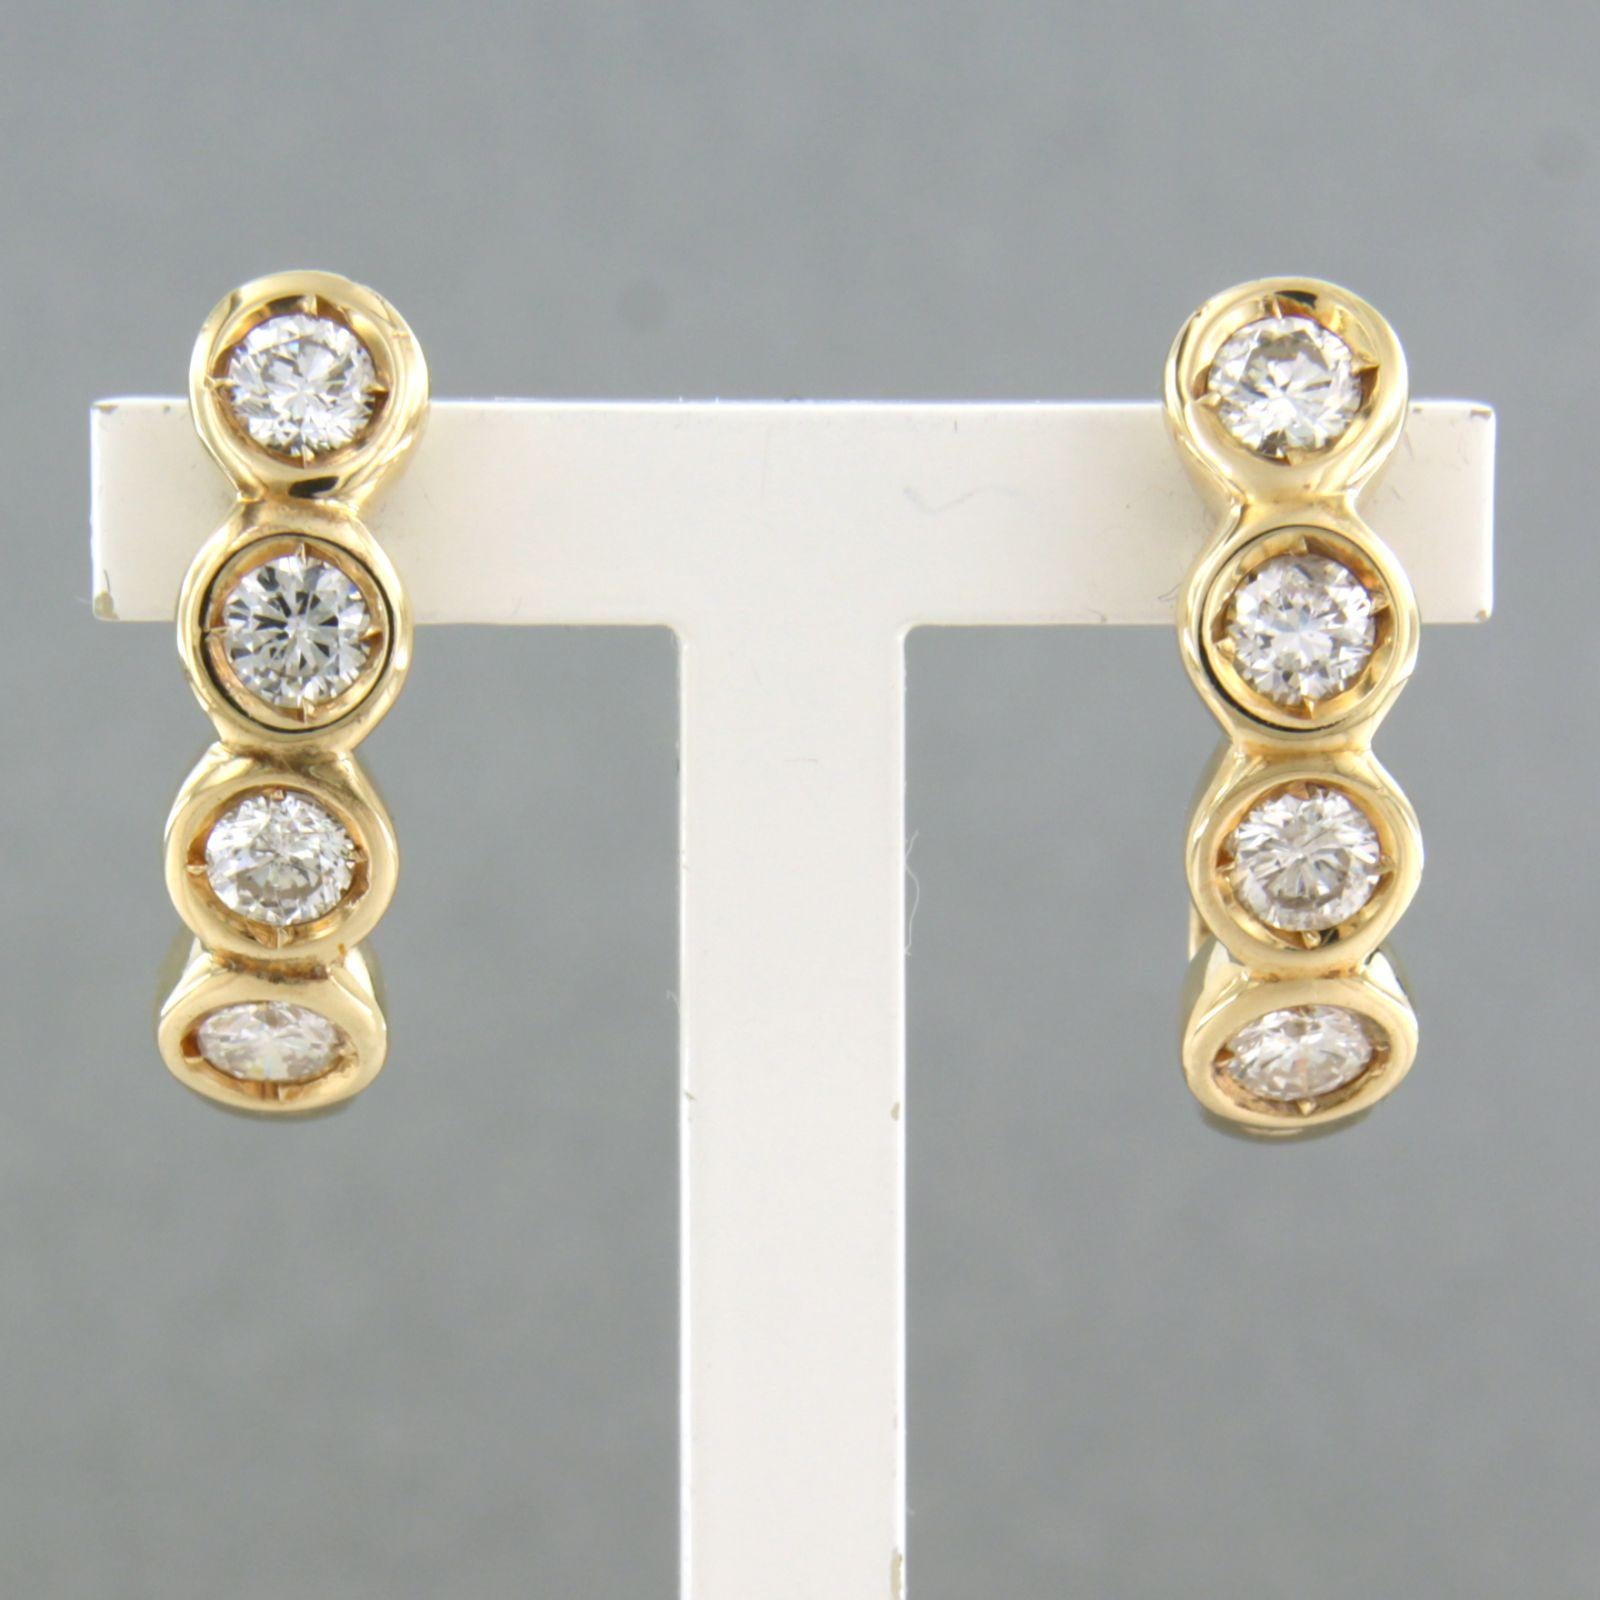 14k yellow gold earrings set with brilliant cut diamond 1.00ct - F/G - VS/SI

detailed description:

the size of the earrings is 2.0 cm high and 0.5 cm wide

Total weight 6.0 grams

set with

- 8 x 3.2 mm brilliant cut diamond, approximately 1.00